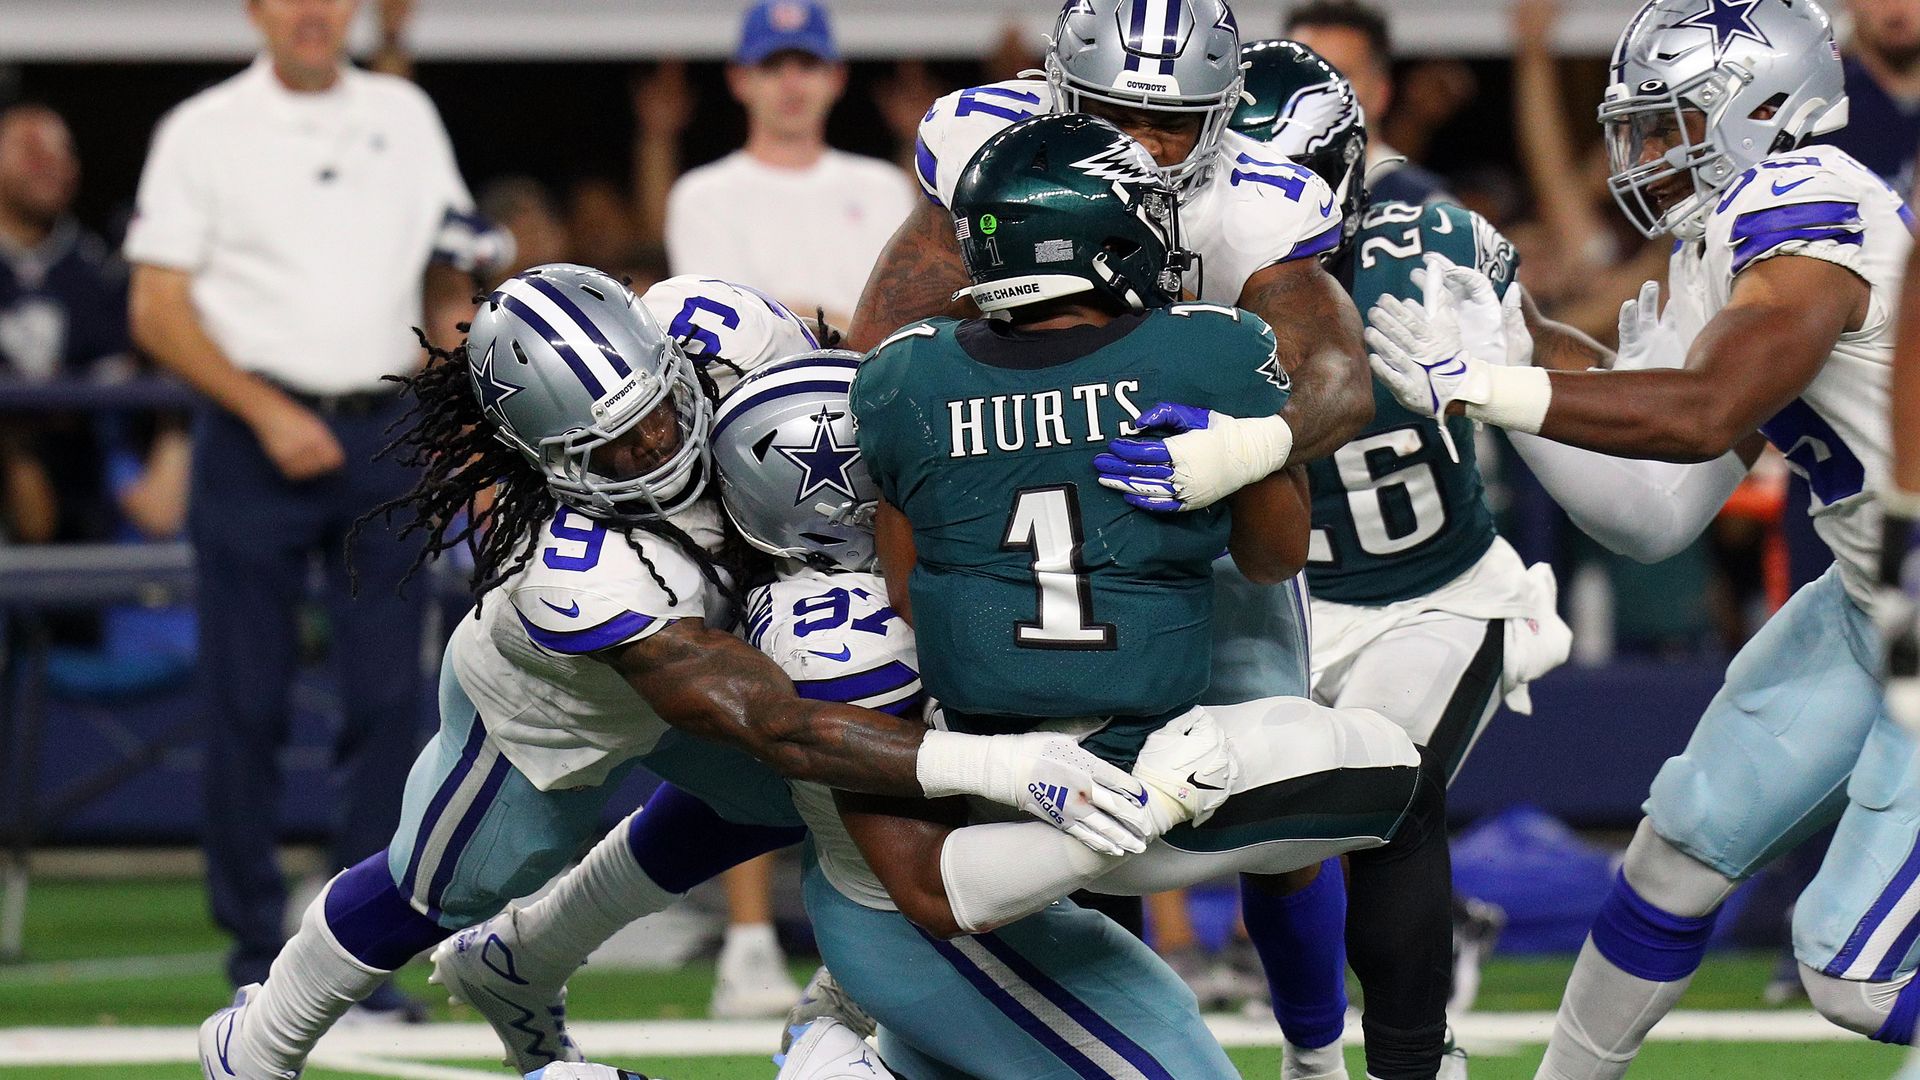 Eagles QB Jalen Hurts taken down by a group of Dallas Cowboys tacklers.